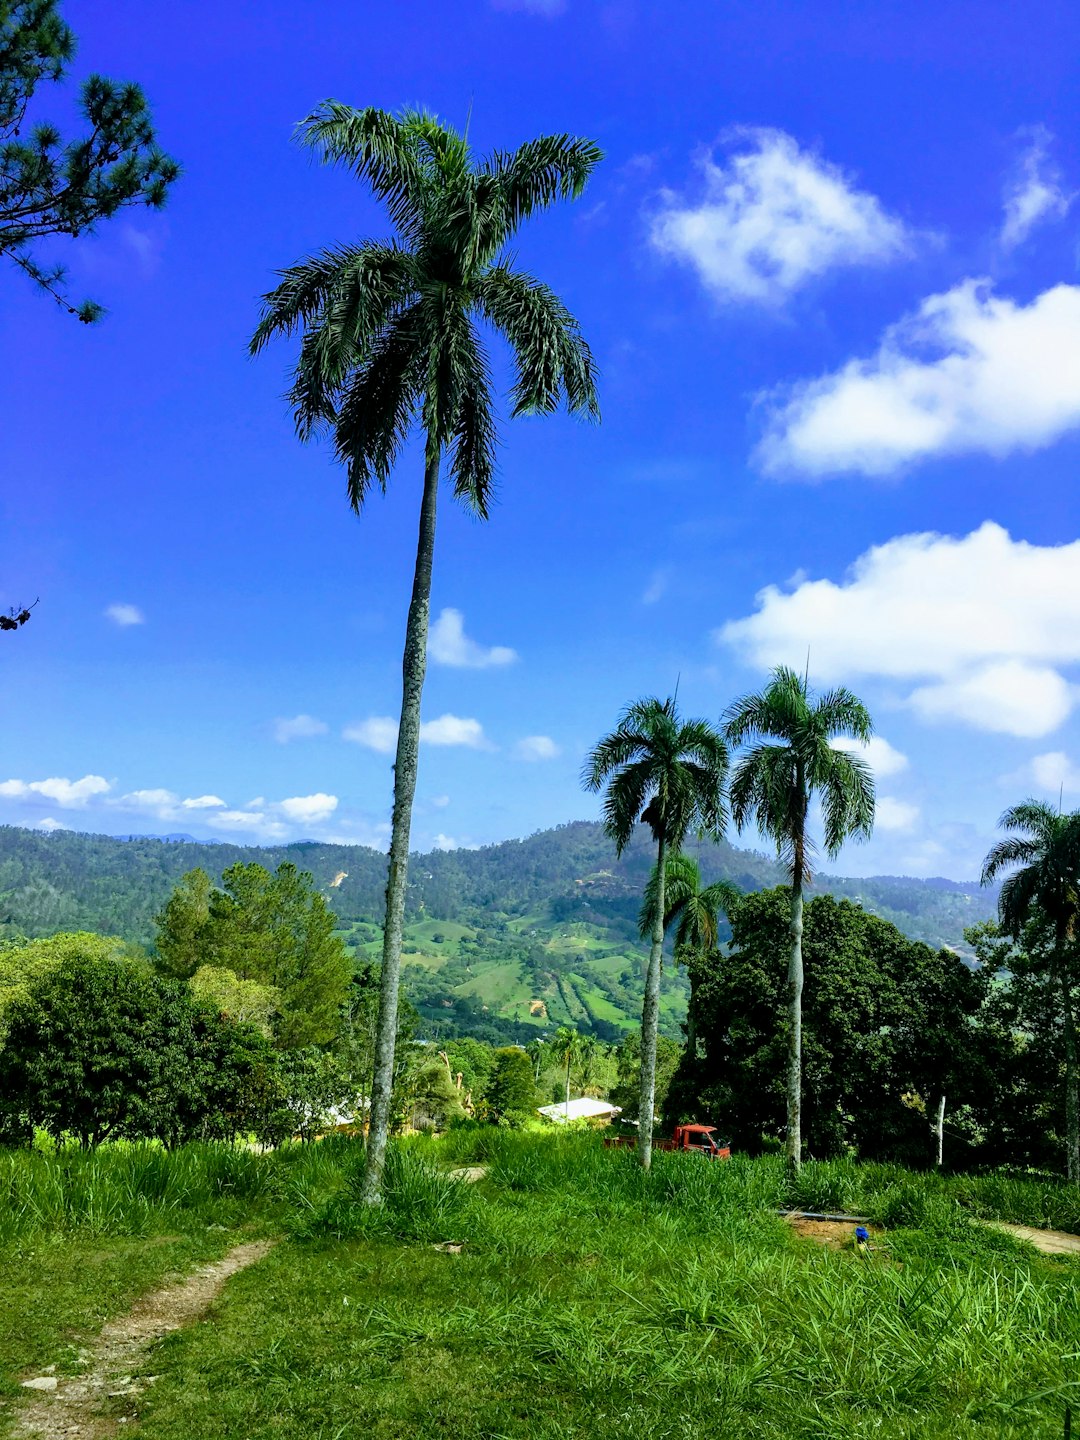 travelers stories about Ecoregion in Jarabacoa, Dominican Republic